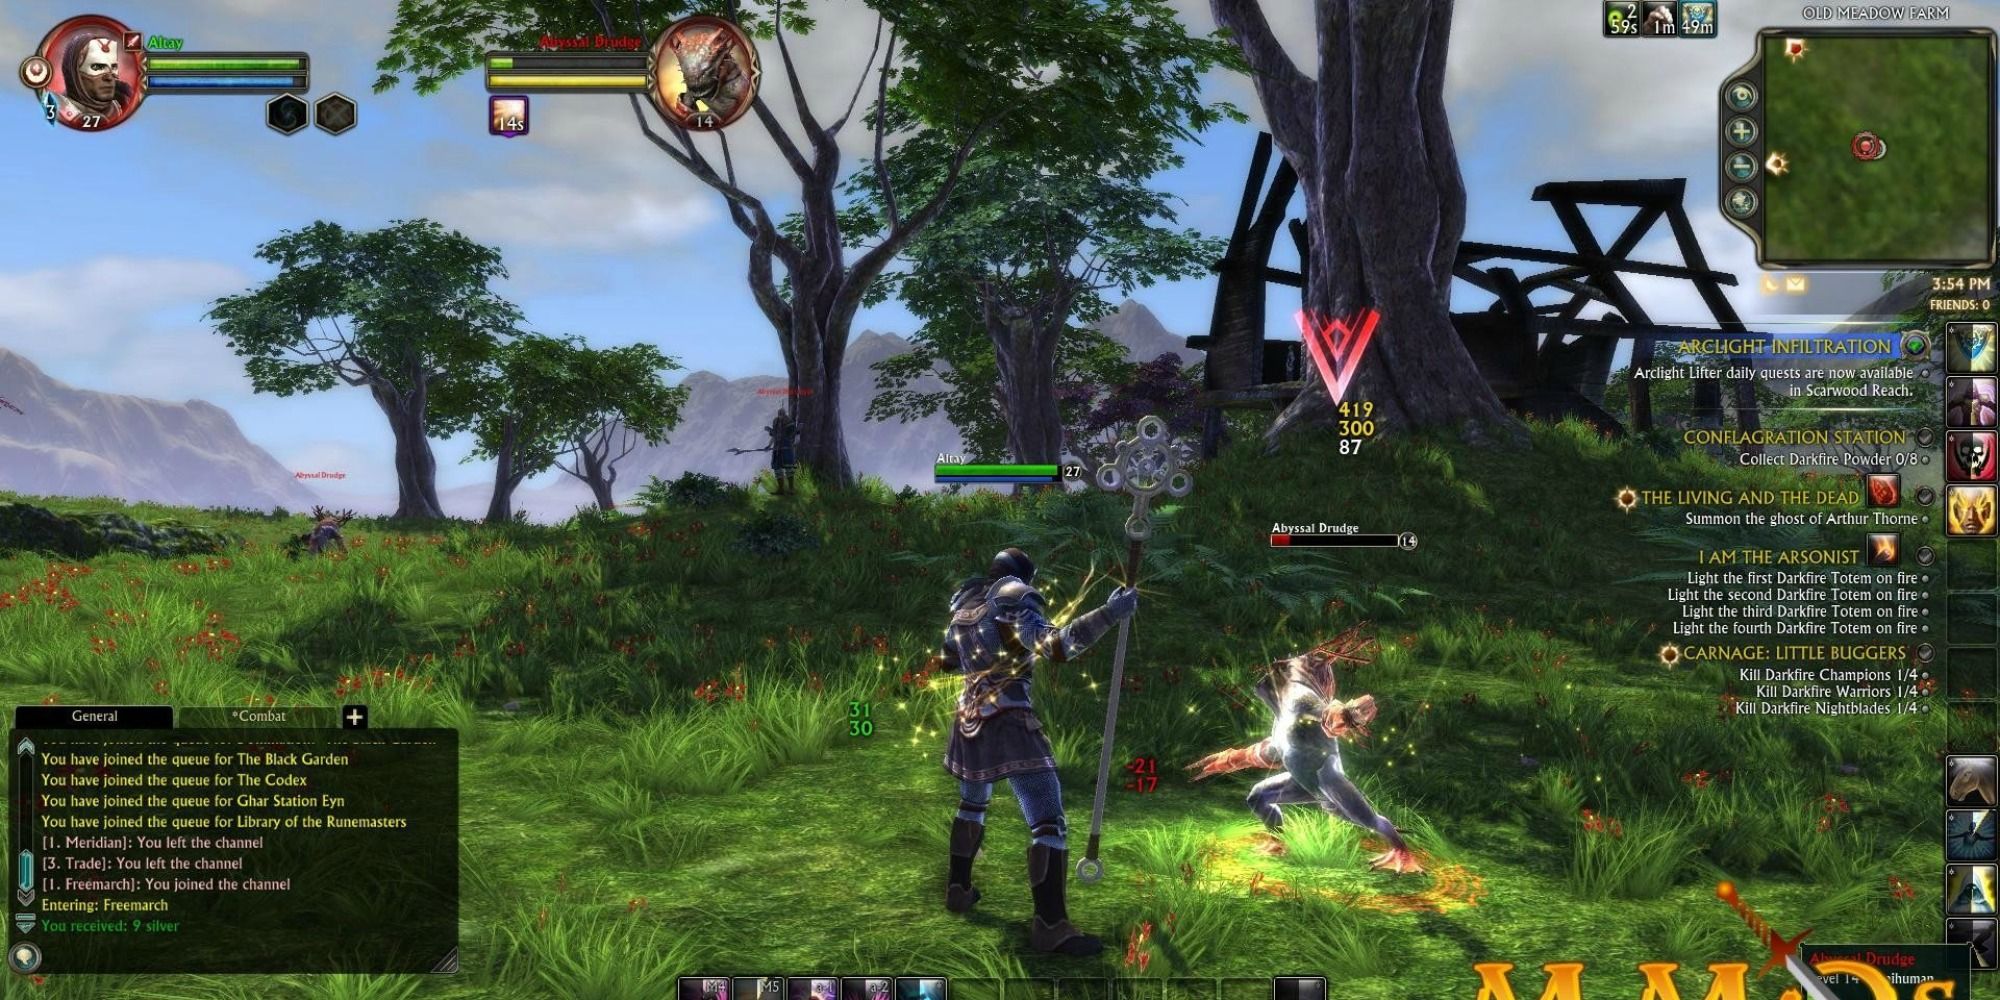 The player character defeating the enemy in Rift